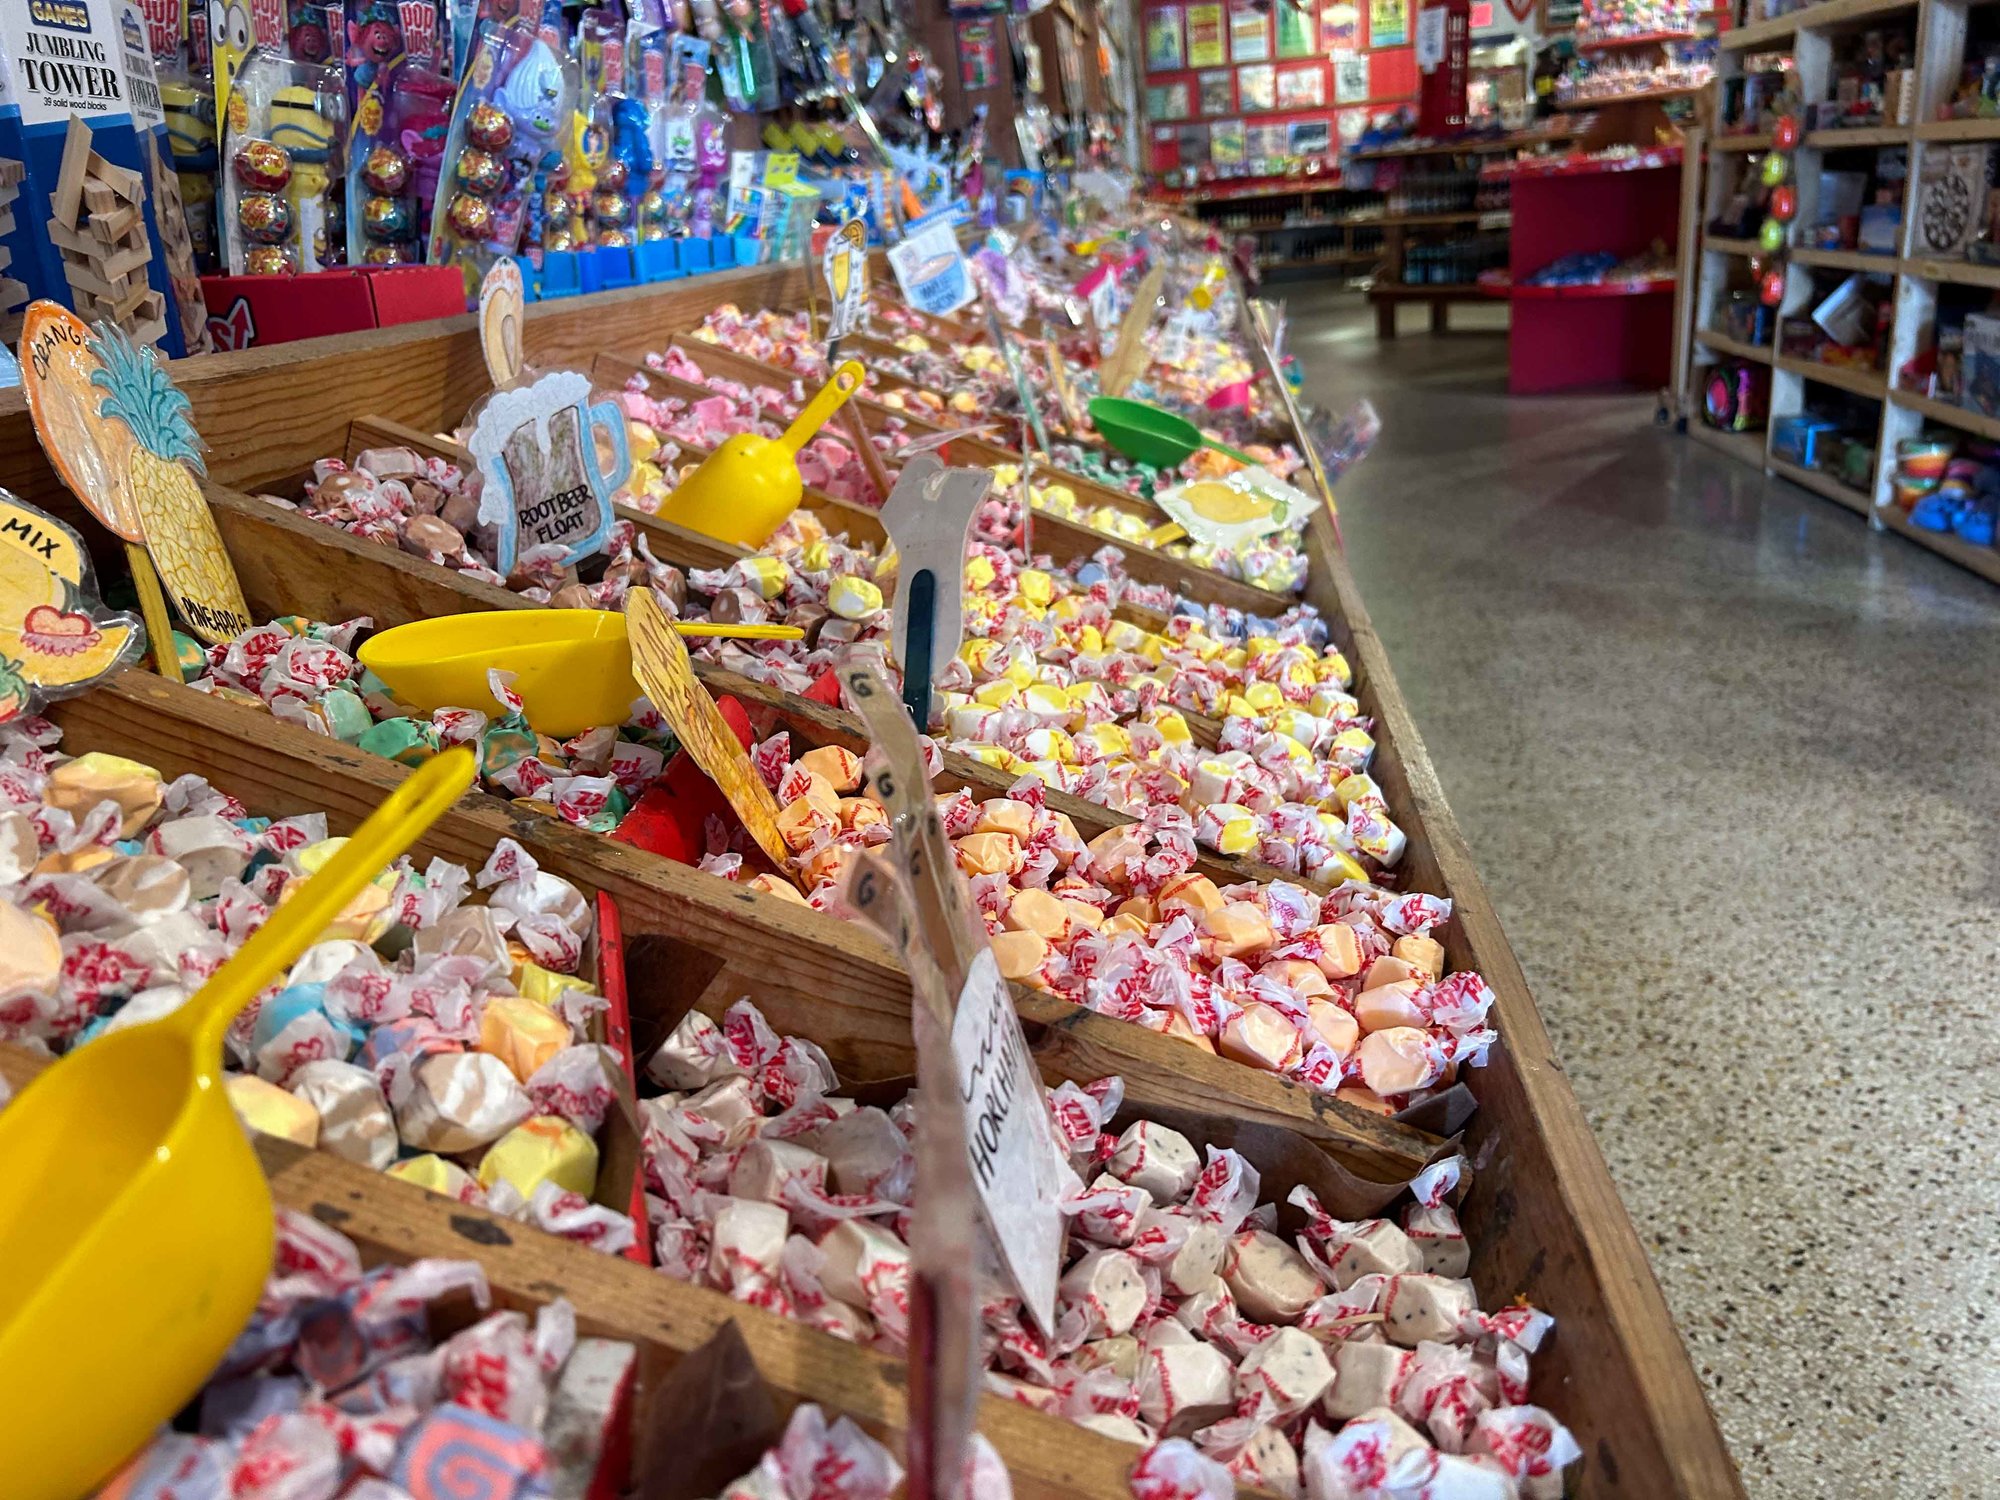 aisle with bins of candy